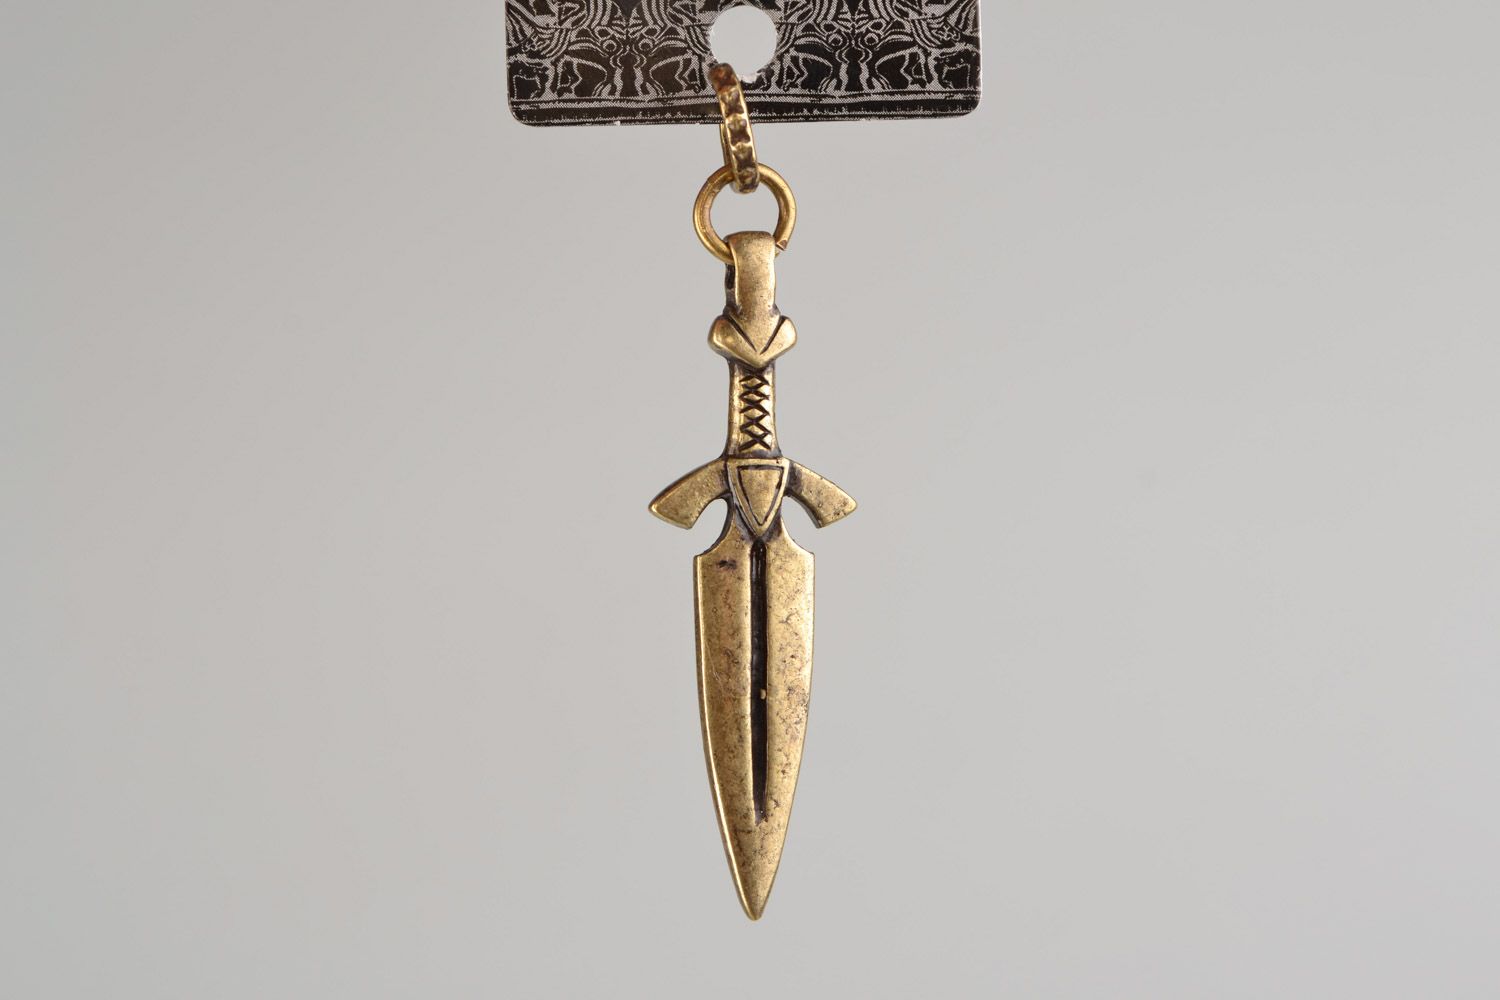 Handmade pendant in the shape of bronze knife cast with the use of permanent mold photo 3